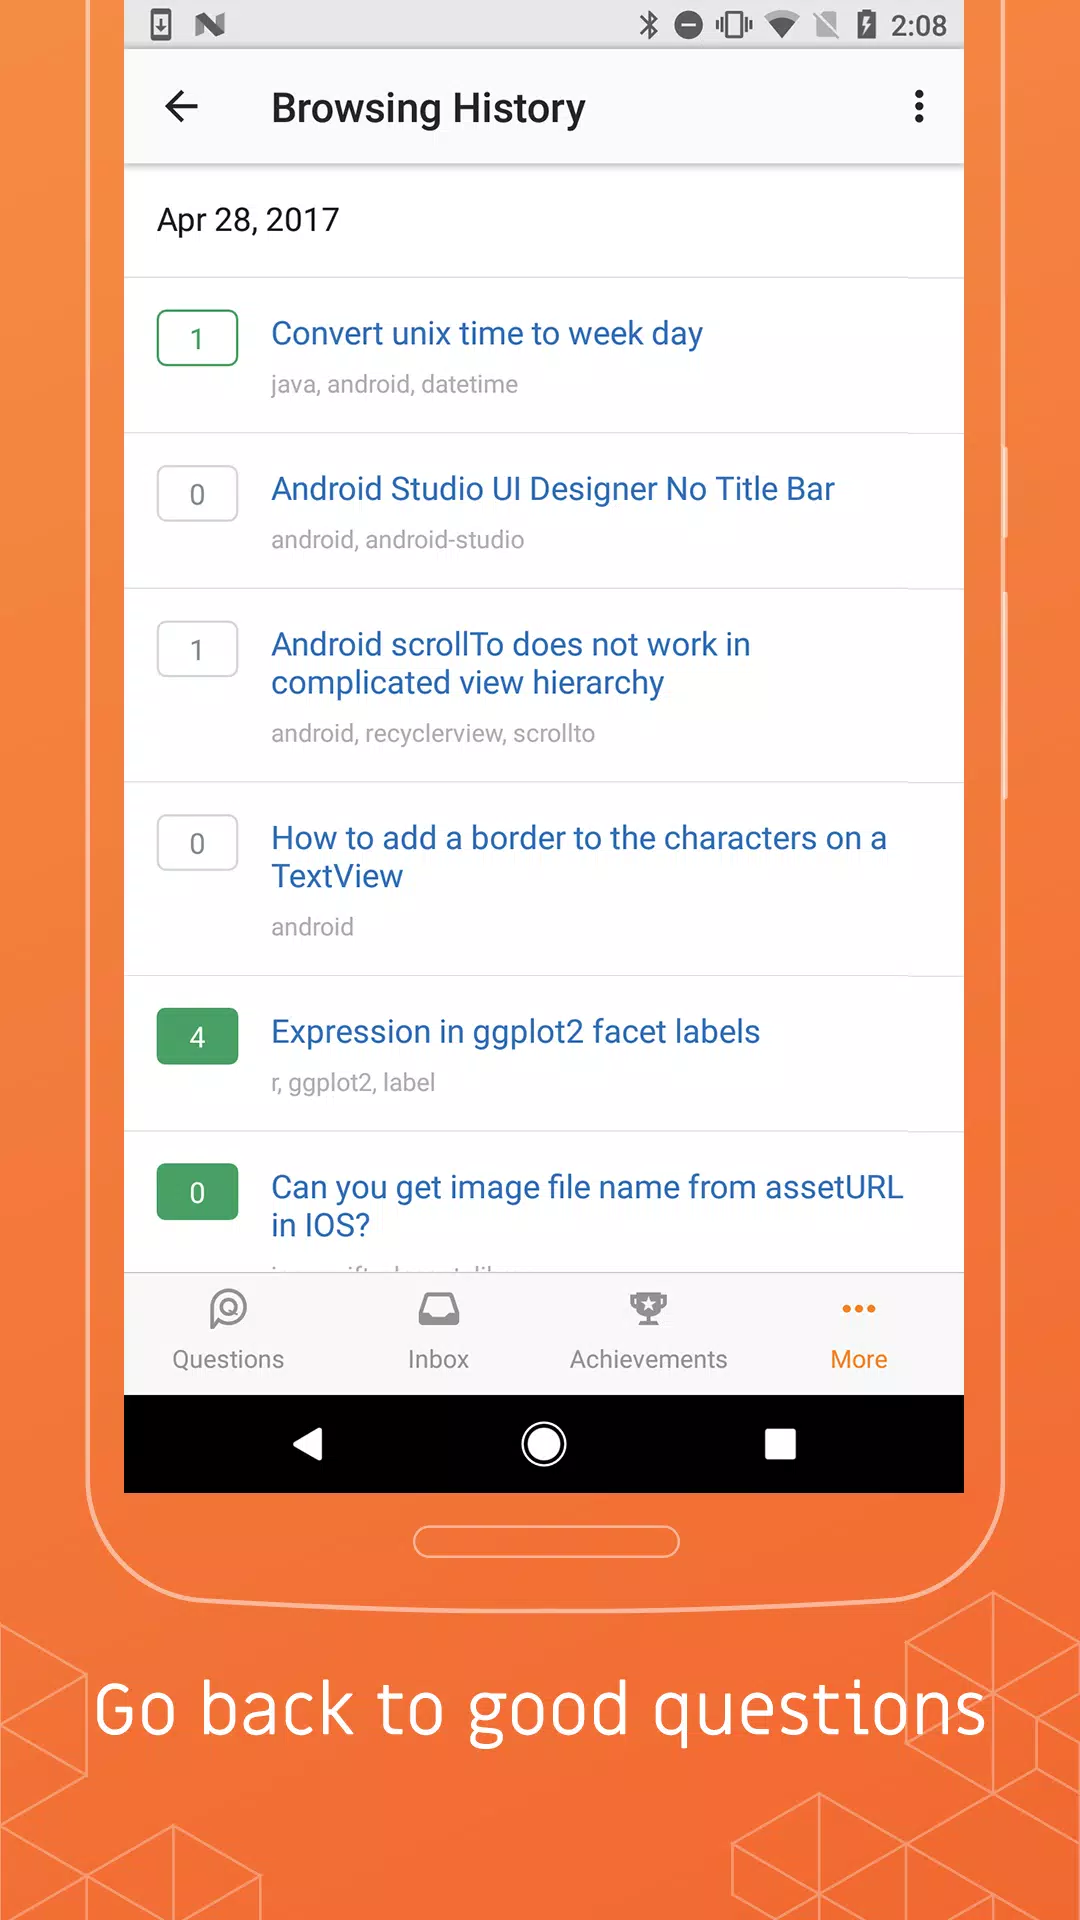 android - Achievements not showing in Google Play Games App - Stack Overflow